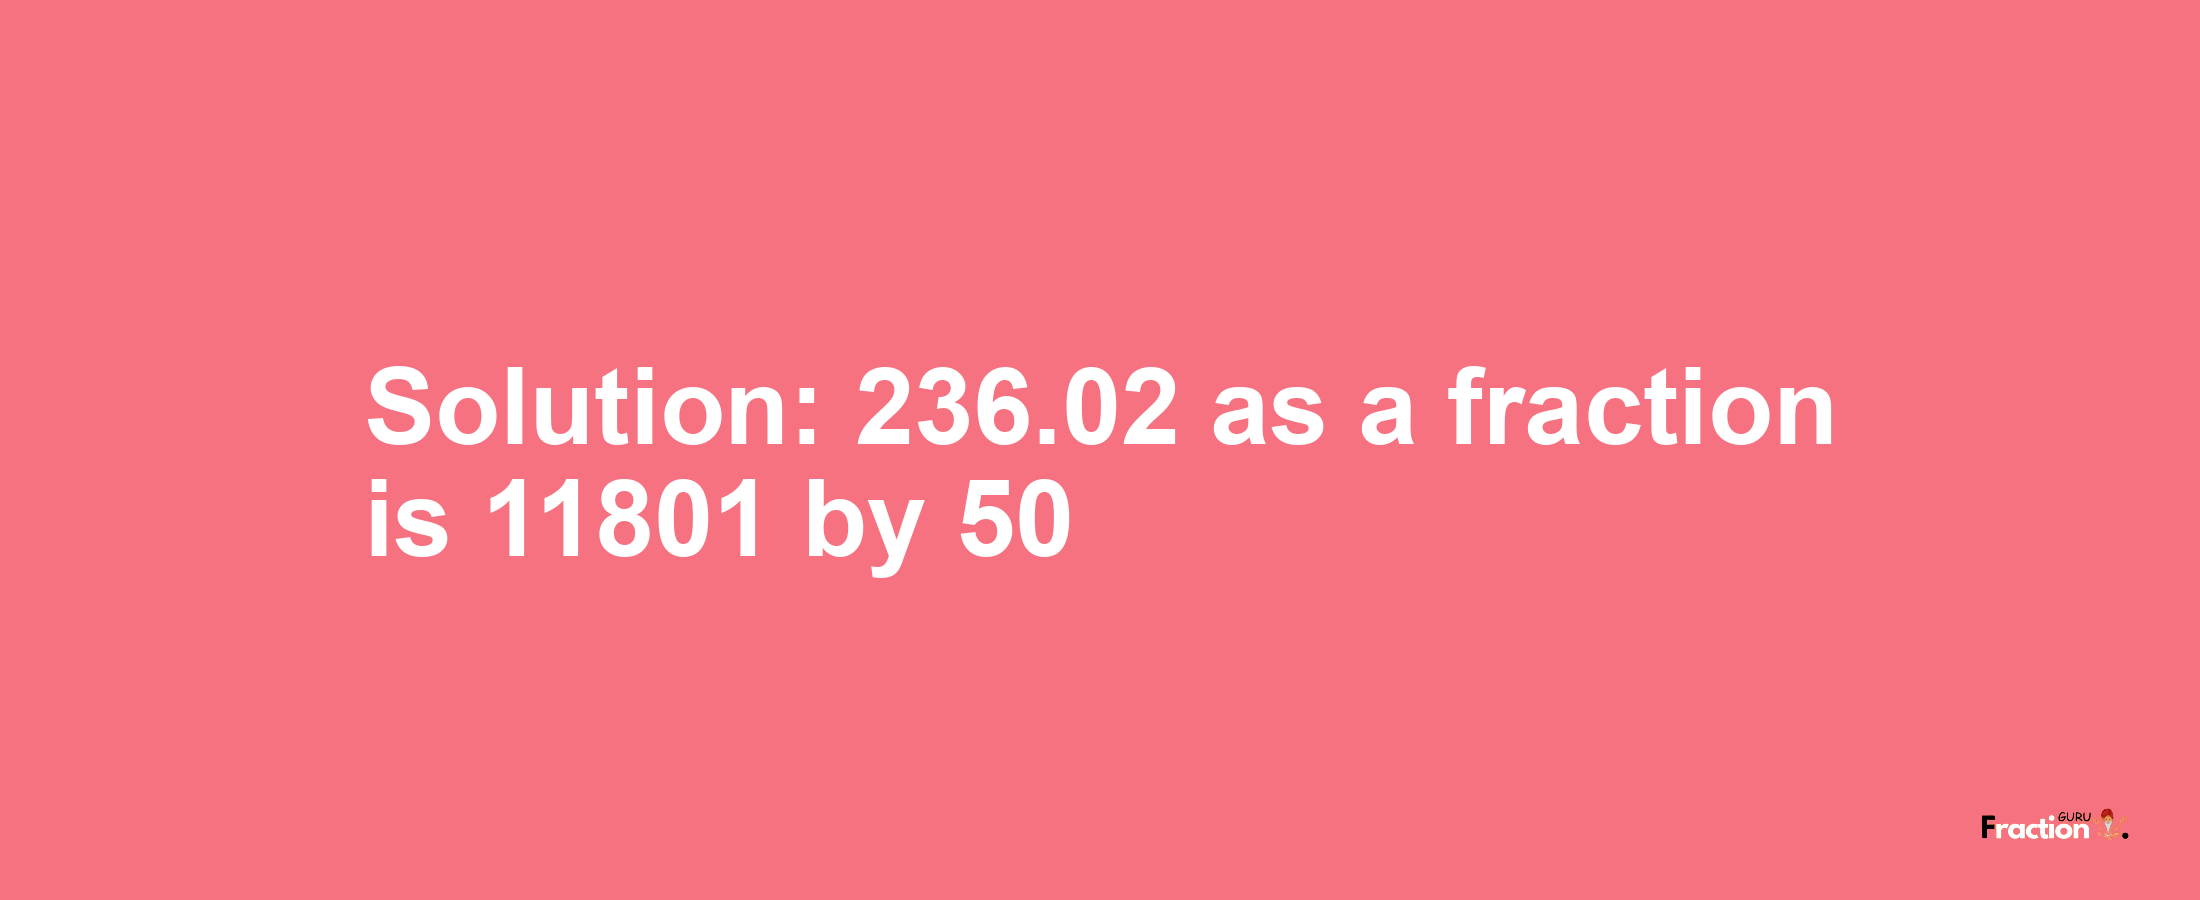 Solution:236.02 as a fraction is 11801/50